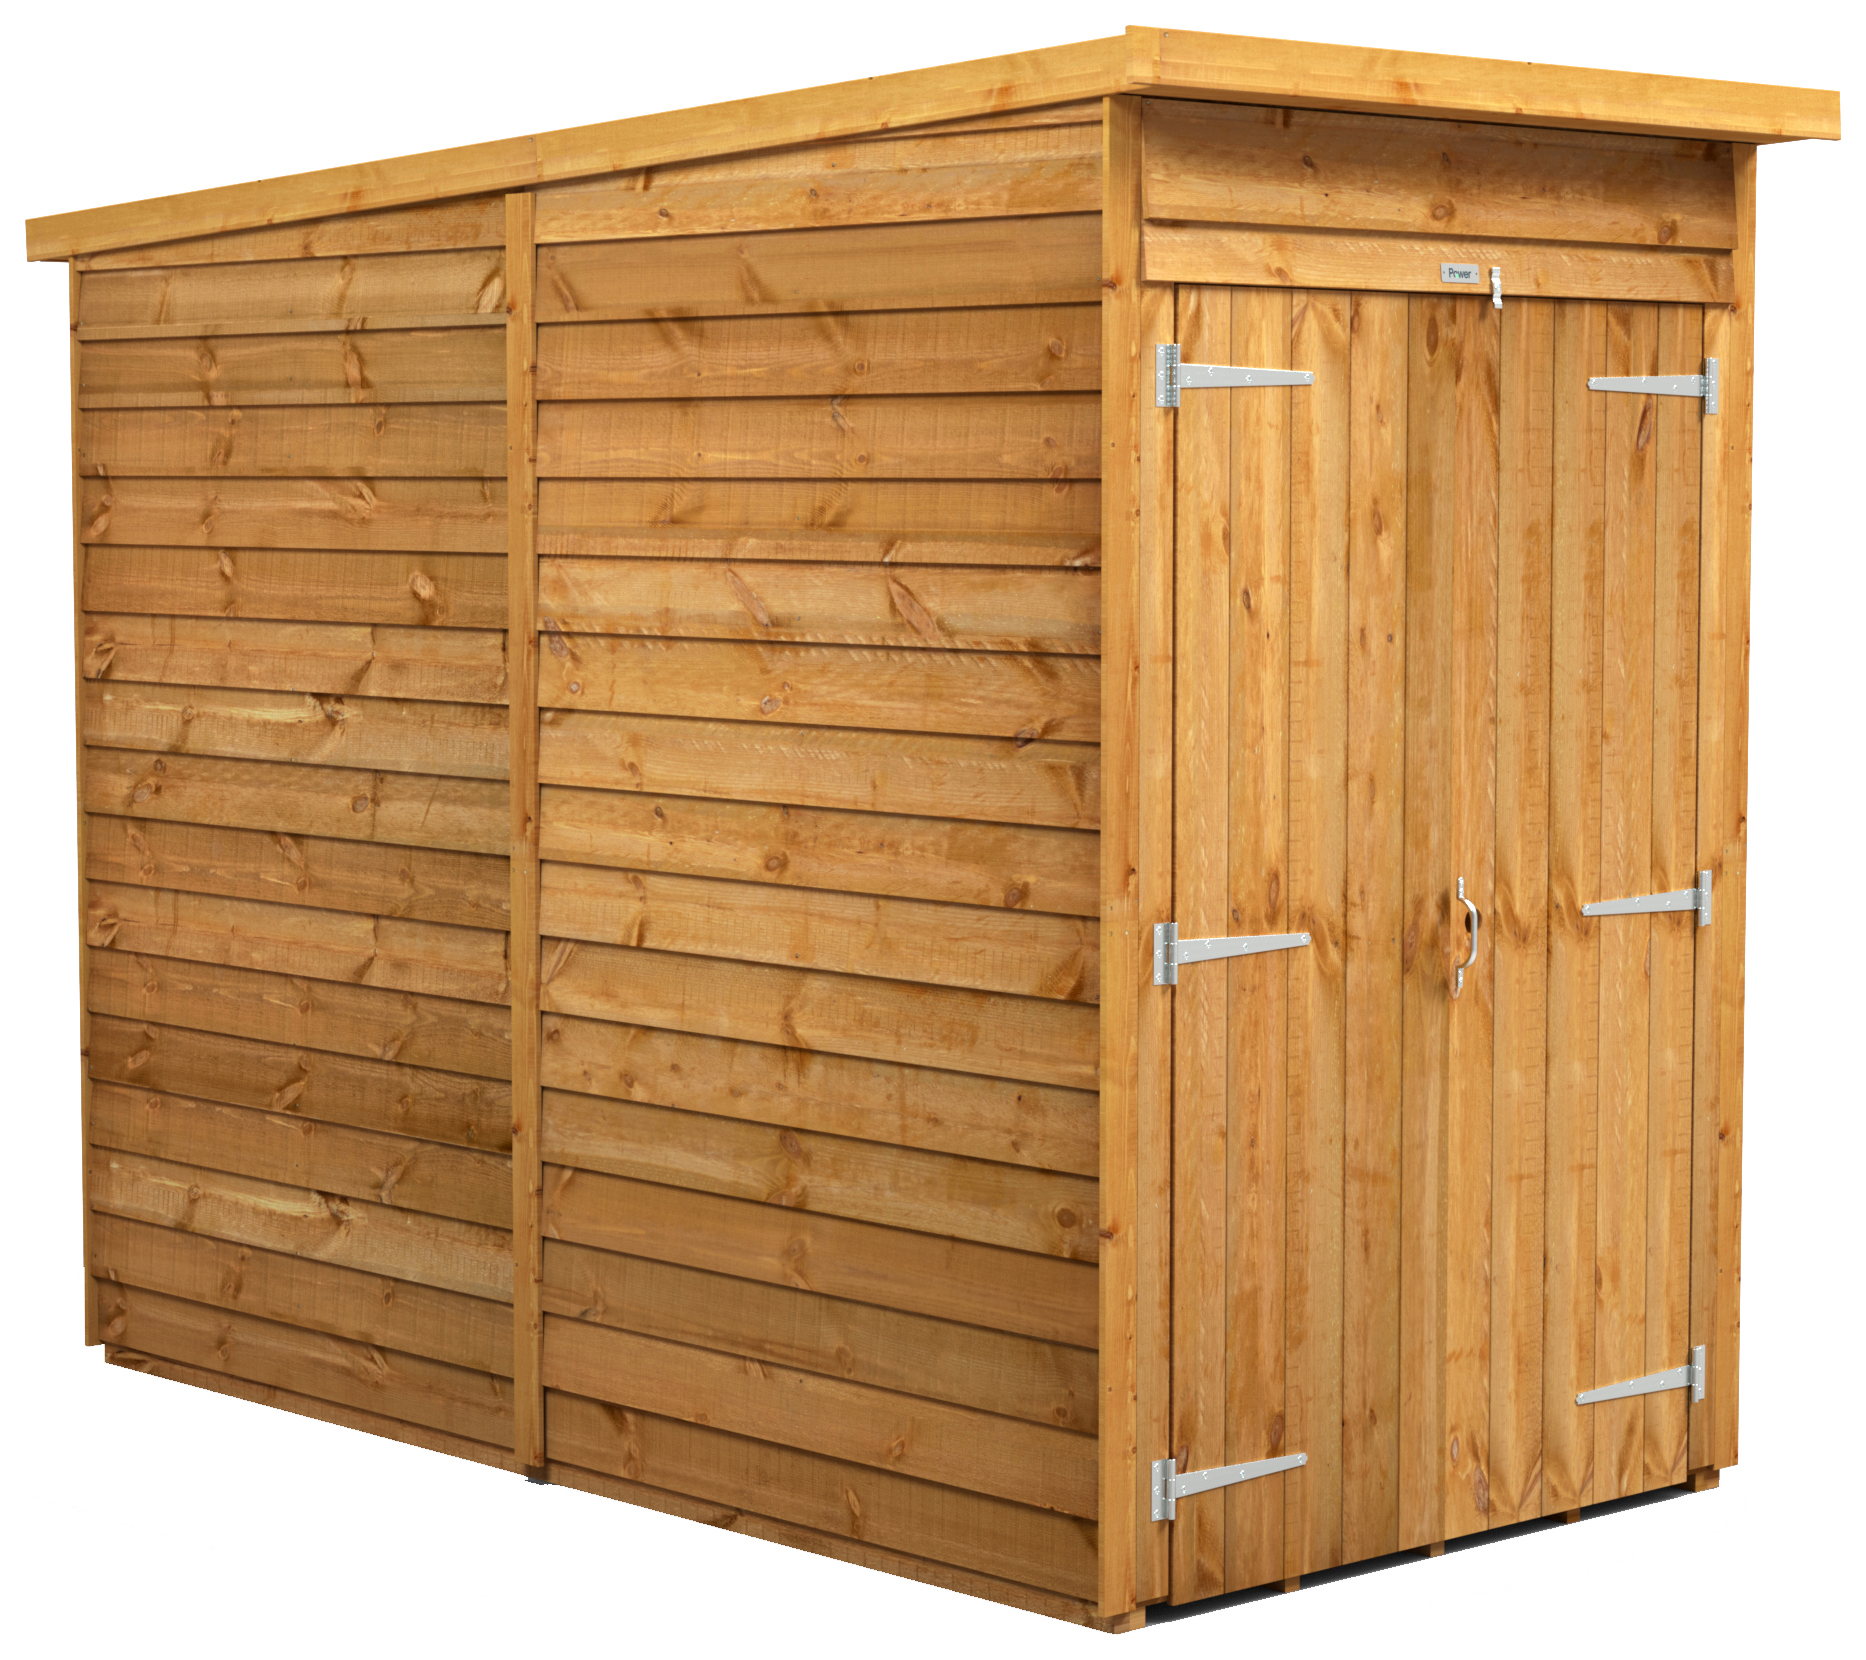 Power Sheds Double Door Pent Overlap Dip Treated Windowless Shed - 4 x 8ft